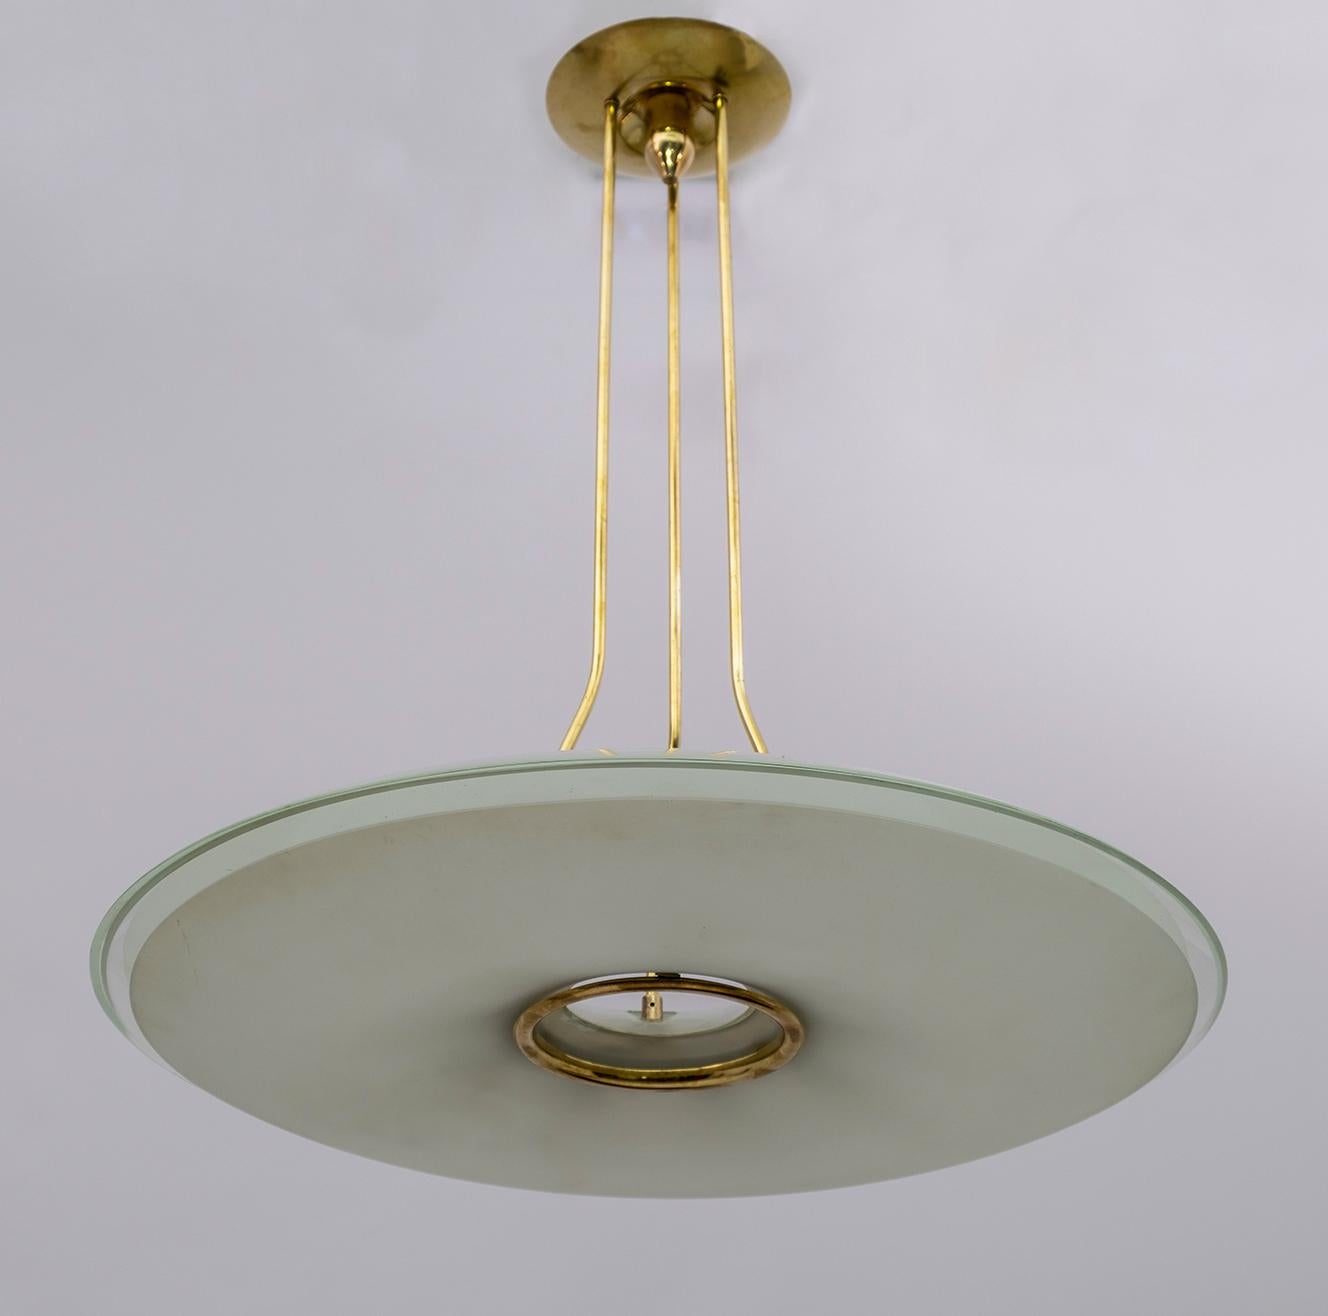 Chandelier attributed to Max Igrand for Fontana Arte, Italy, circa 1950s. Cast brass and curved crystal. Two large curved etched glass lampshades mounted on a brass frame, at first glance it is in excellent condition, has small chips and two cracks